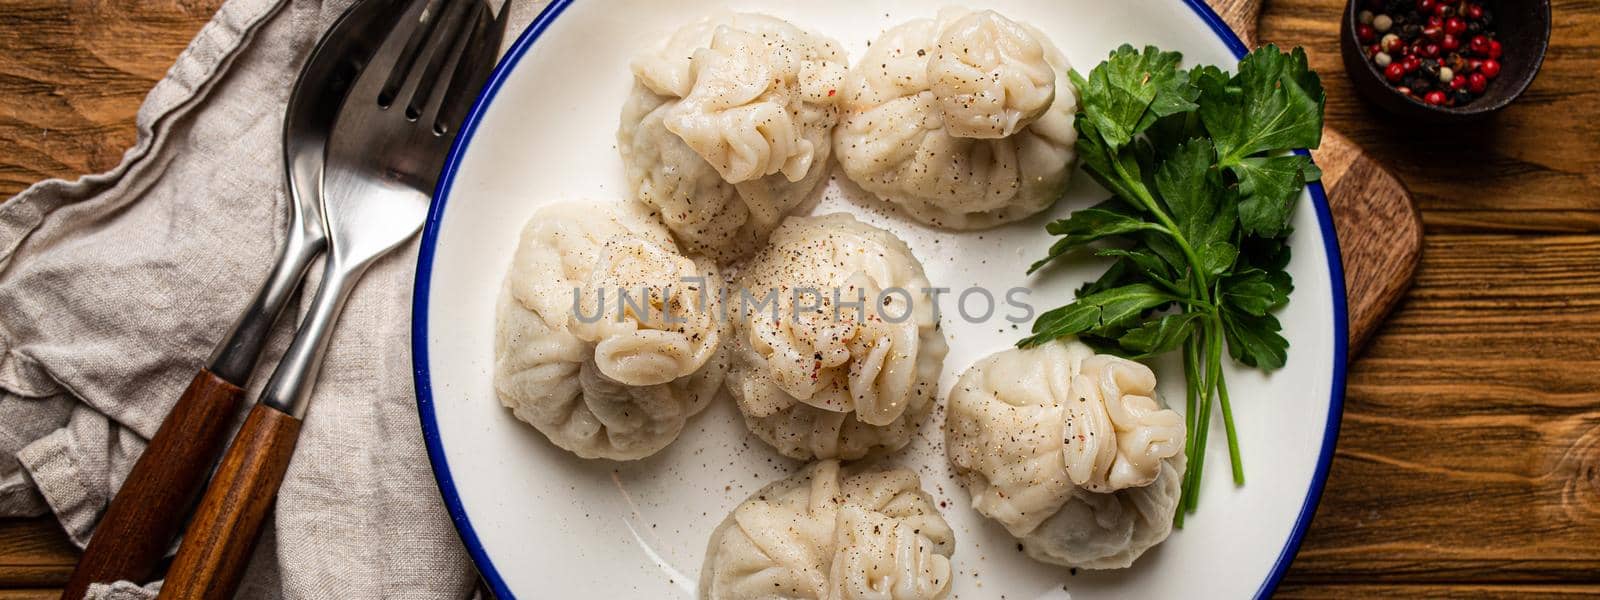 Khinkali, traditional dish of Georgian Caucasian cuisine, dumplings filled with ground meat by its_al_dente